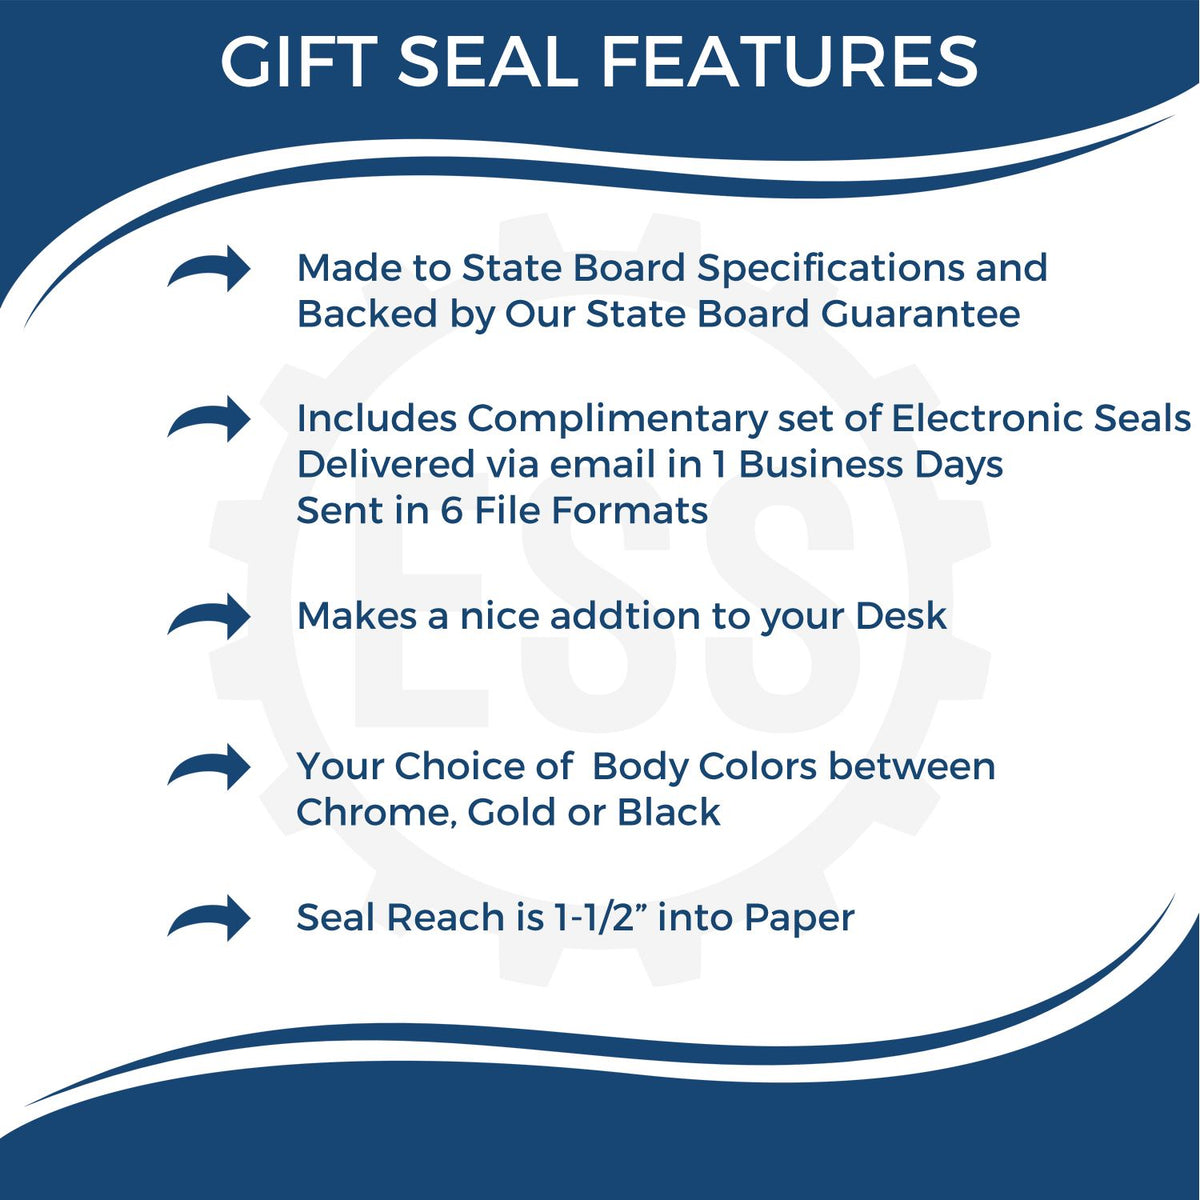 A picture of an infographic highlighting the selling points for the Gift Connecticut Architect Seal